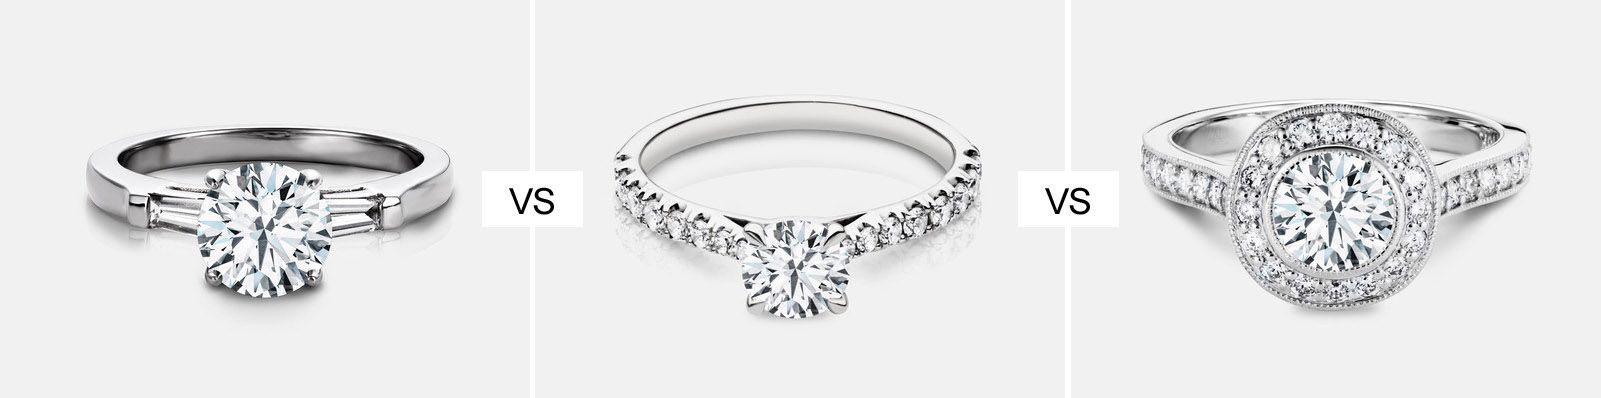 Engagement Ring Prong Types